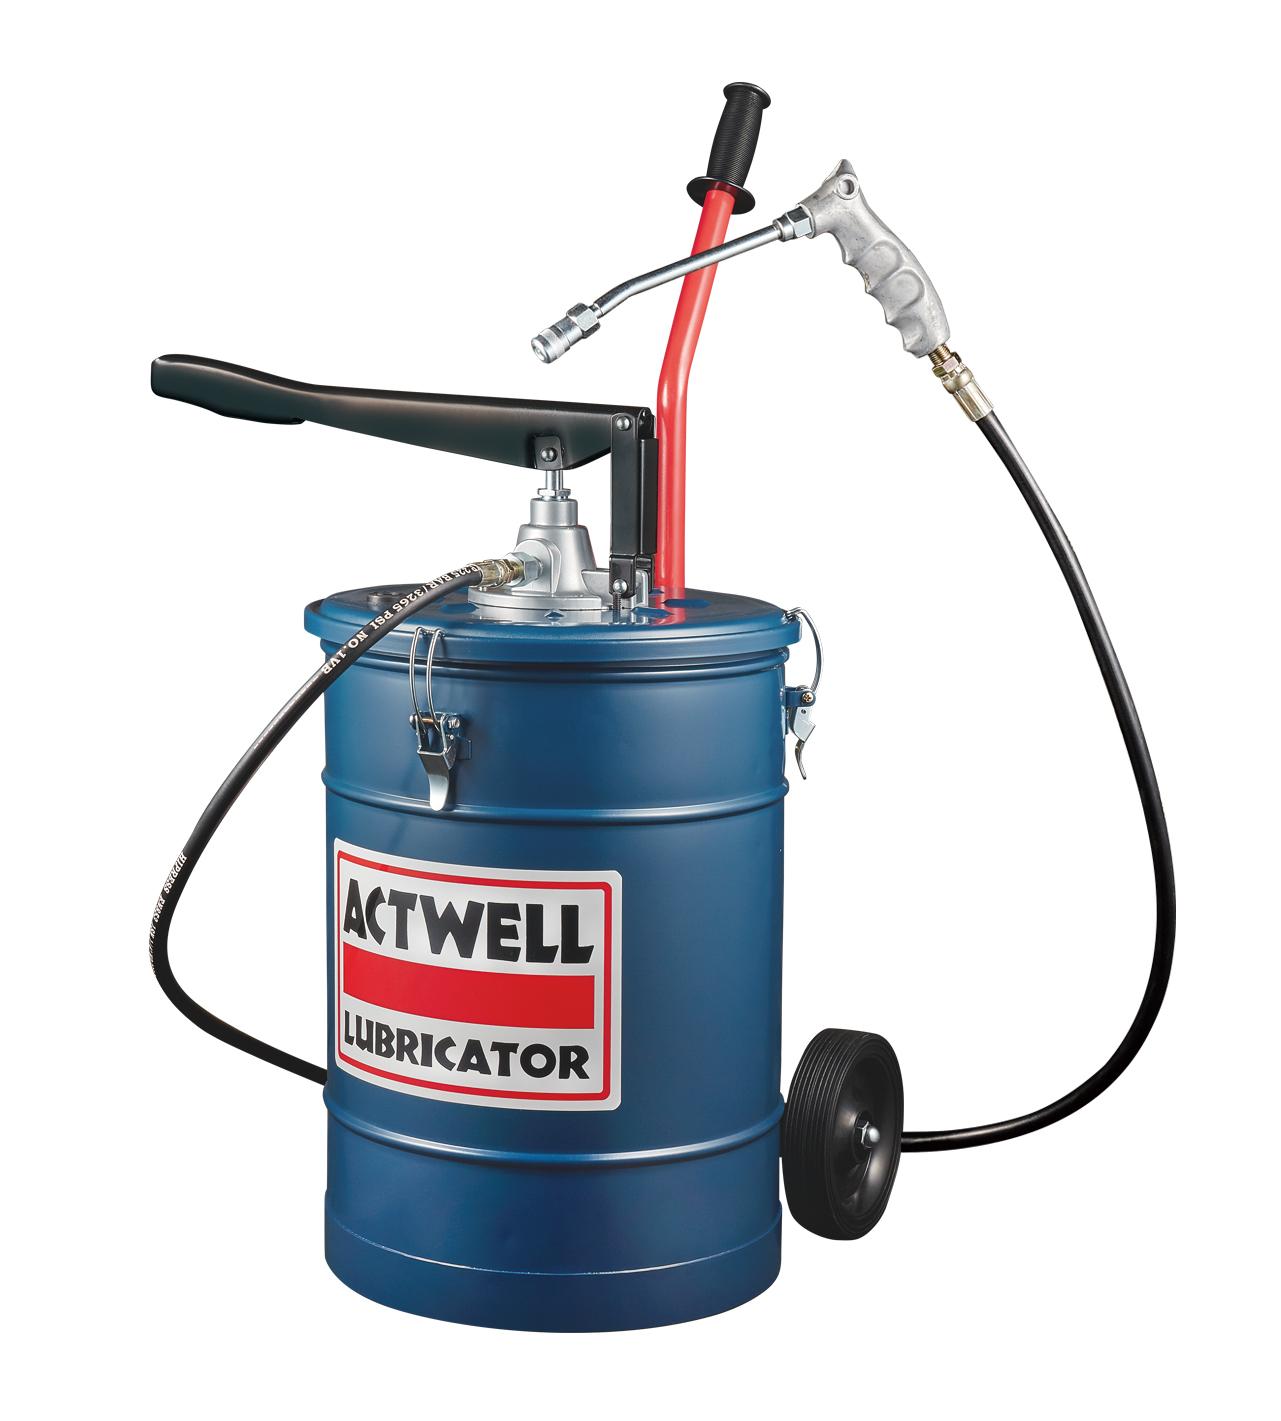 Hand-operated Grease Lubricator-HG-33